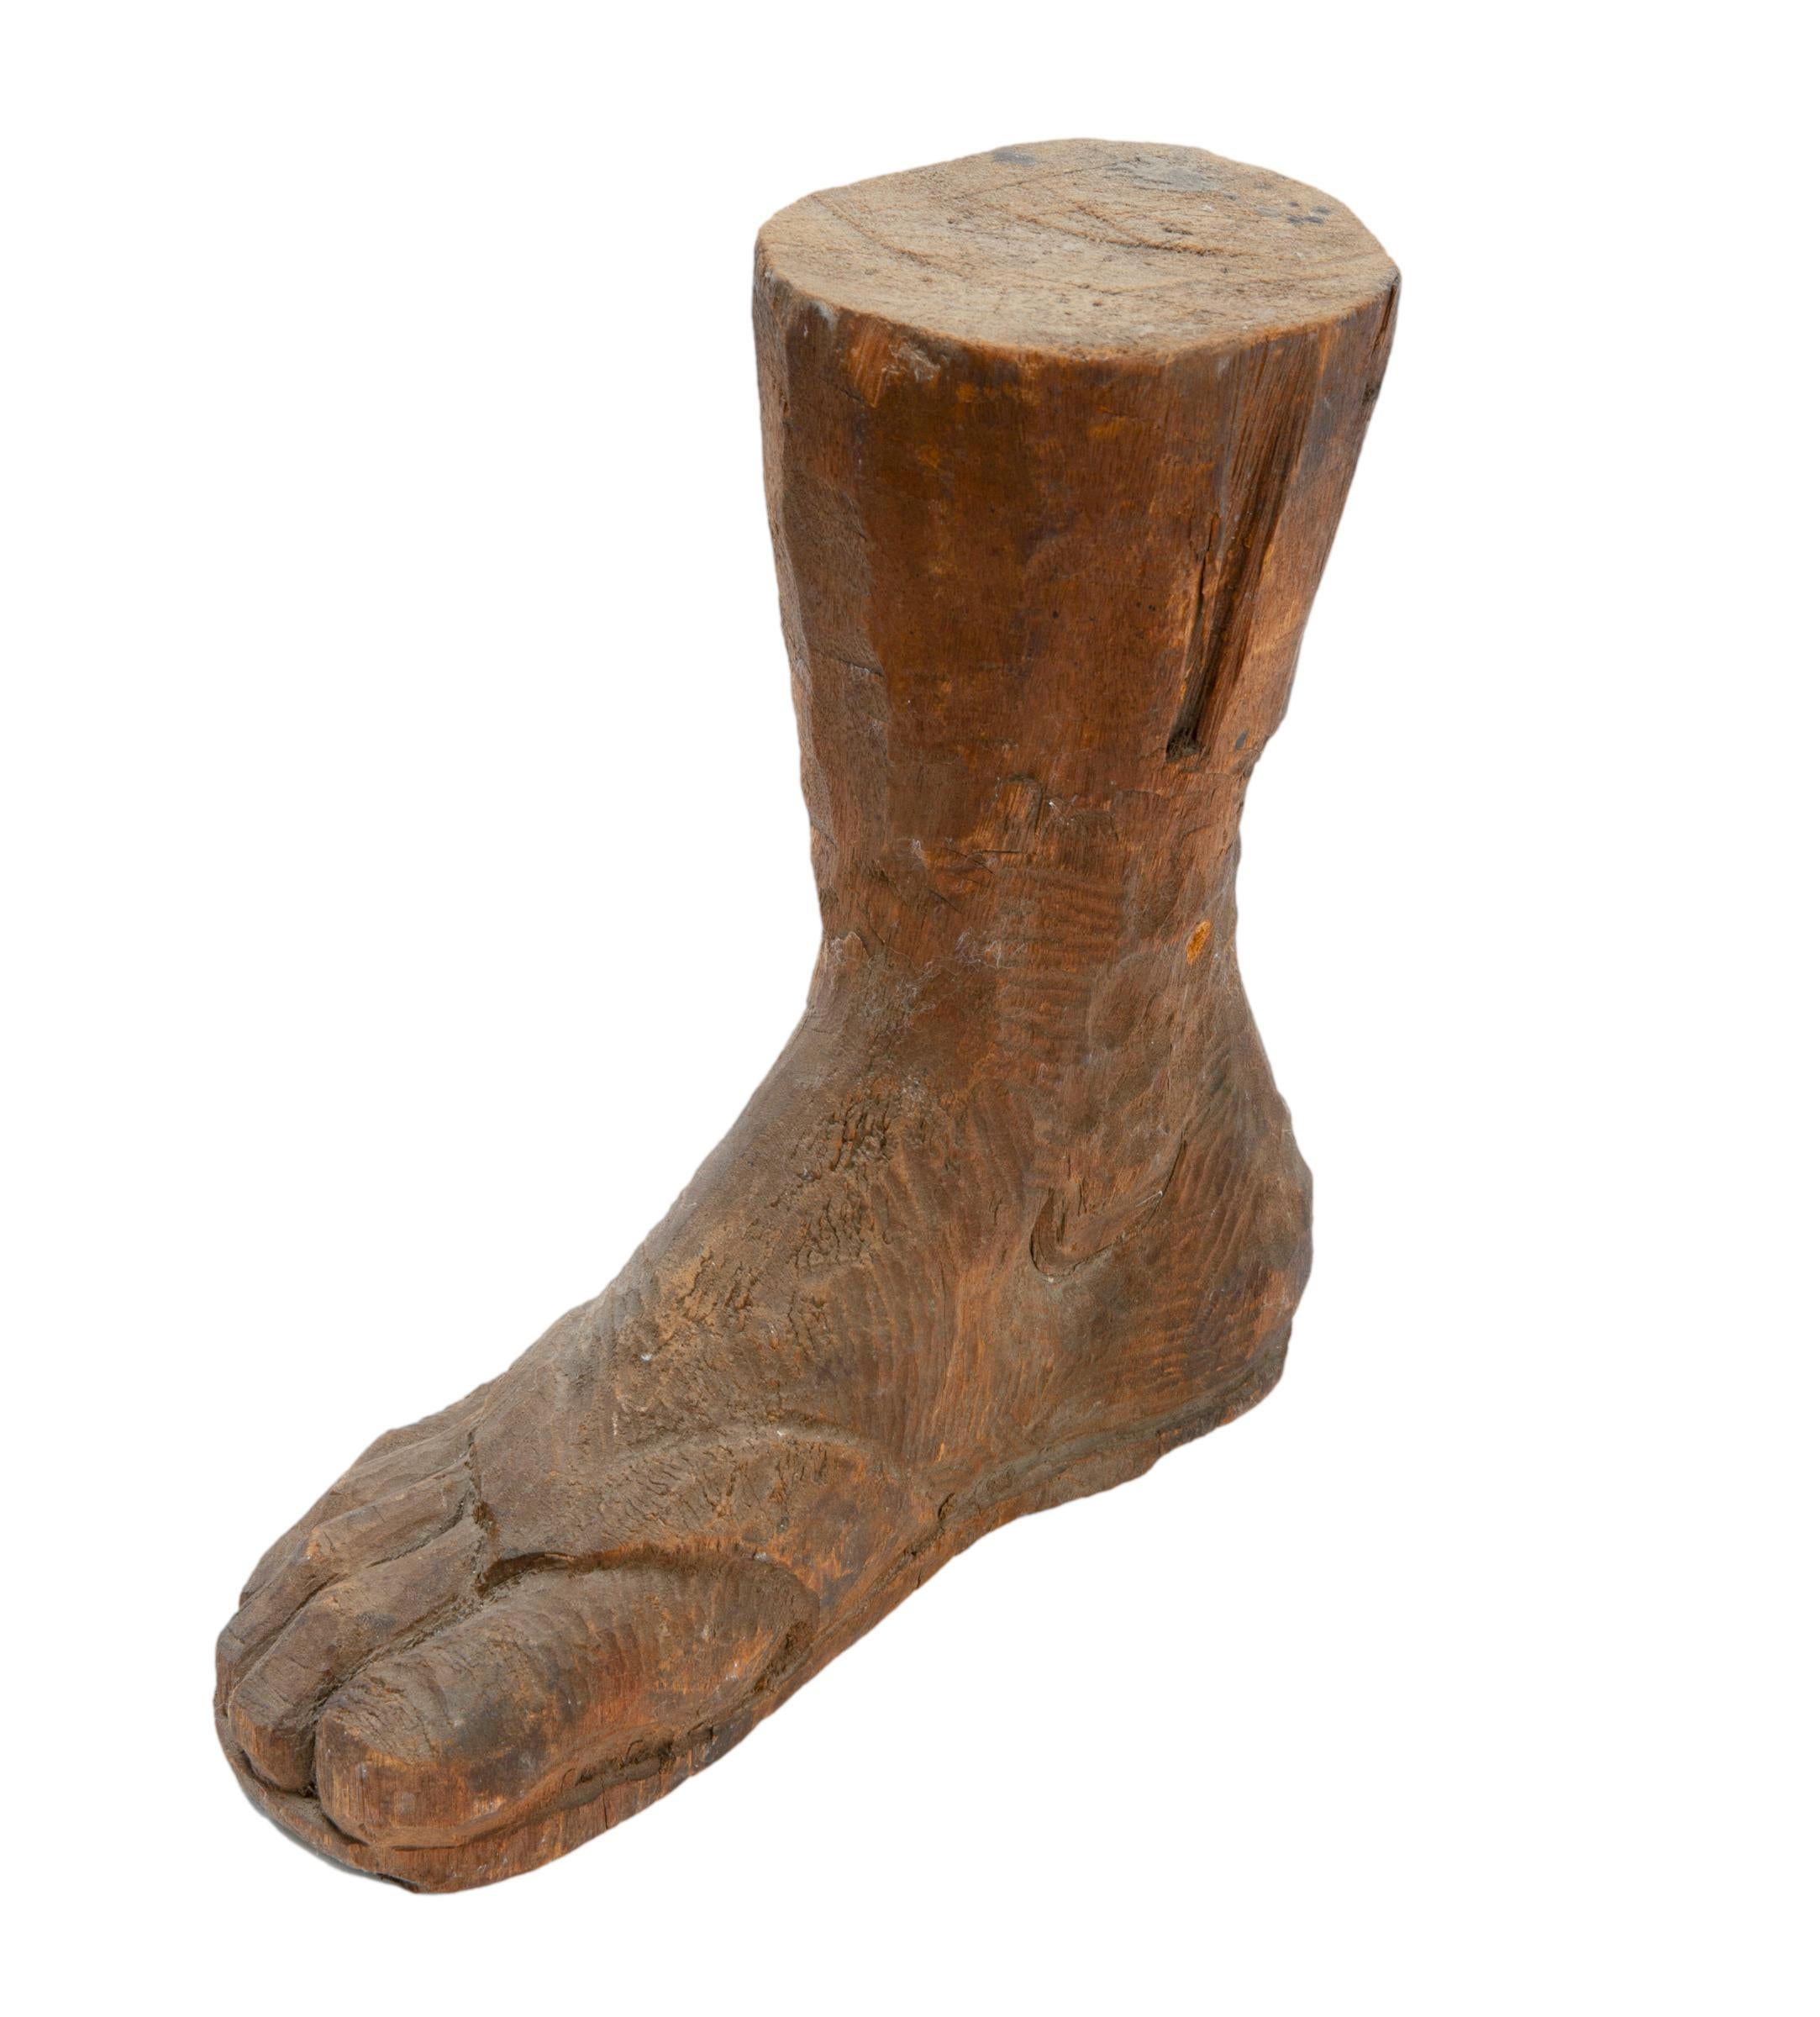 Antique rare & ancient artifact, a foot, wearing a sandal, the bottom of the foot has been carved with the sandals bottom as well.
